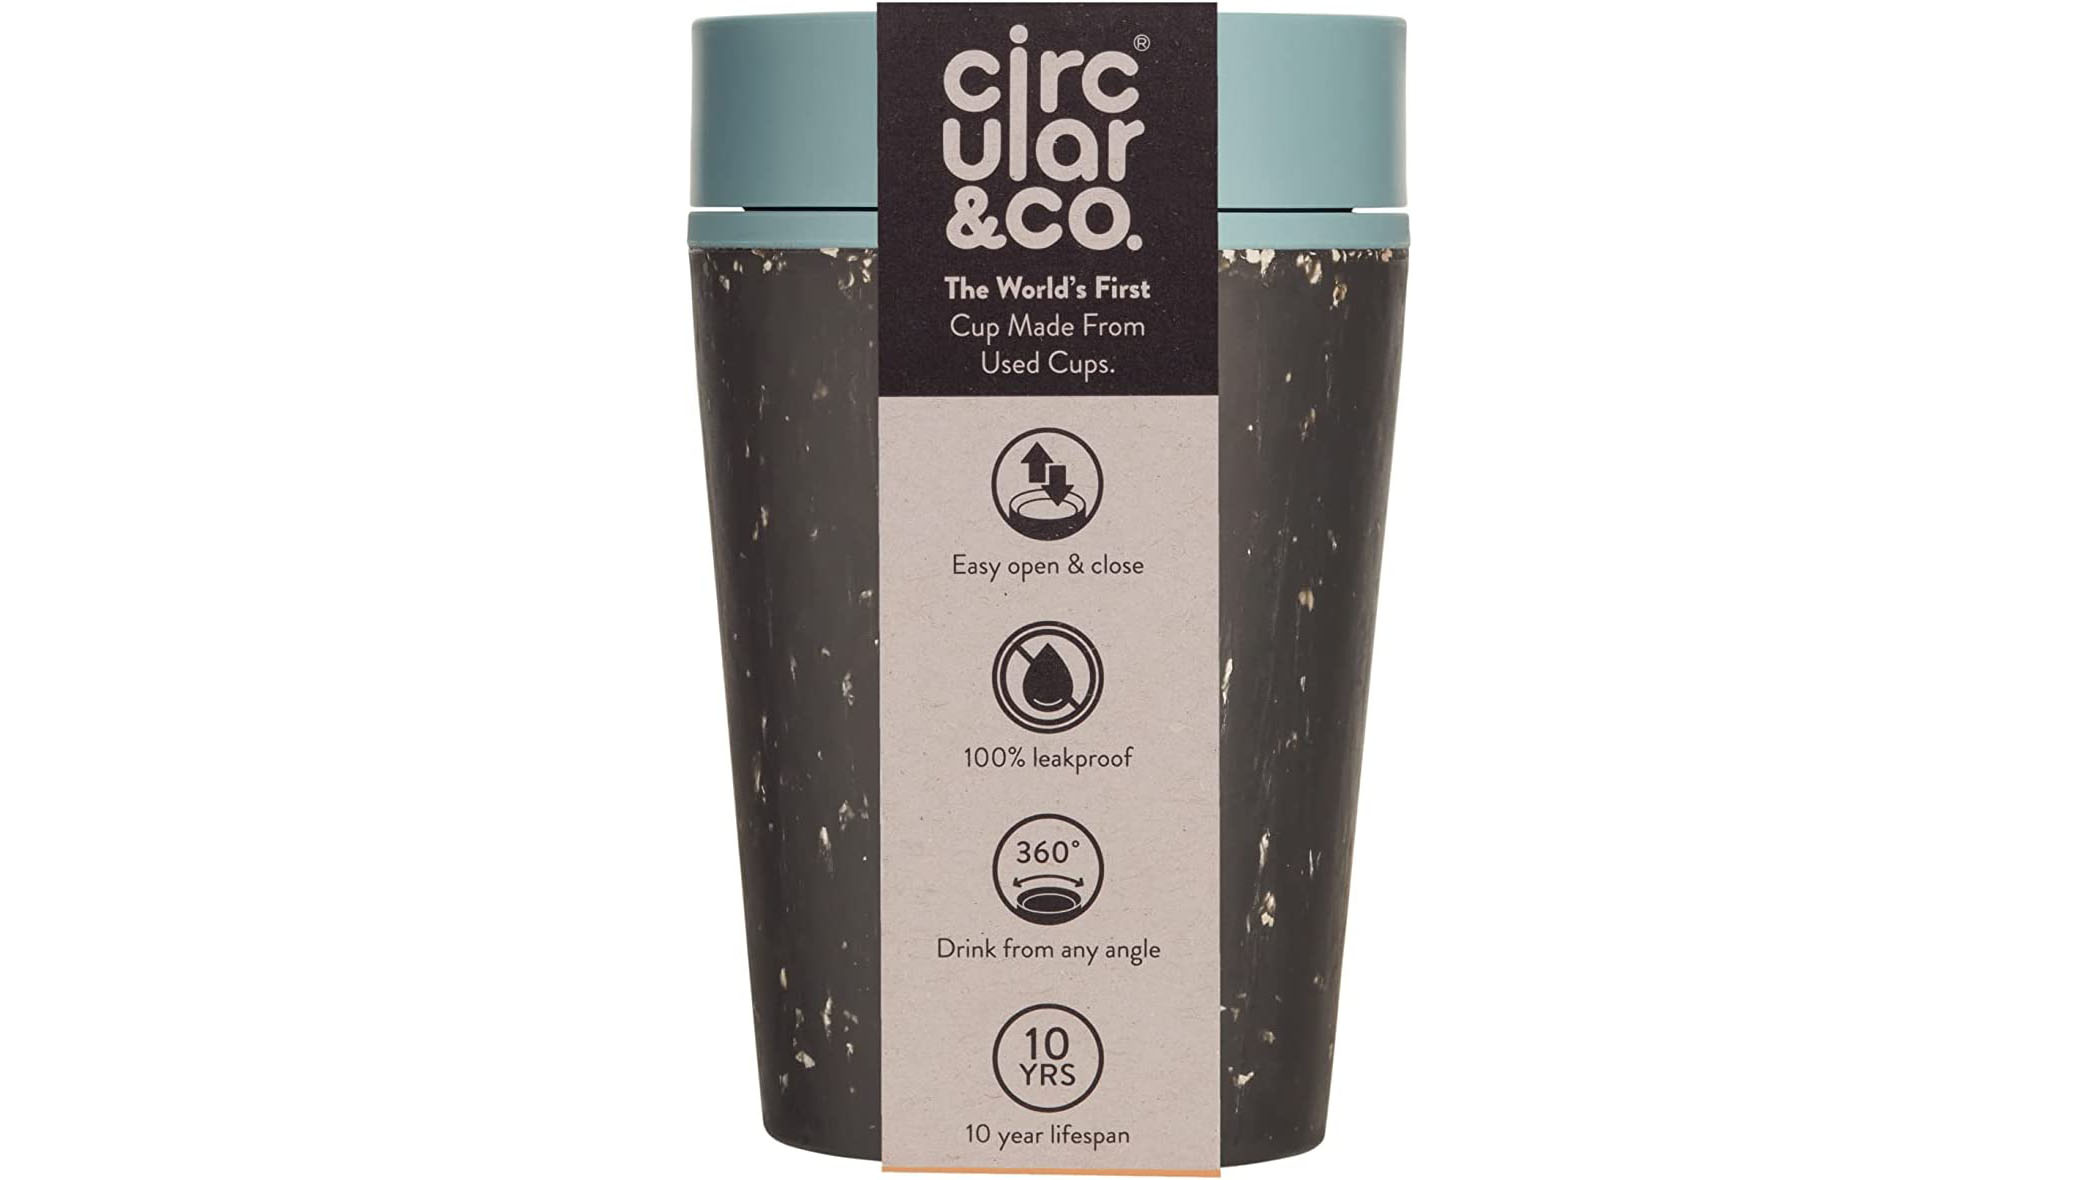 Plant-based Sustainable Deluxe Cup, Reusable Coffee Mug With